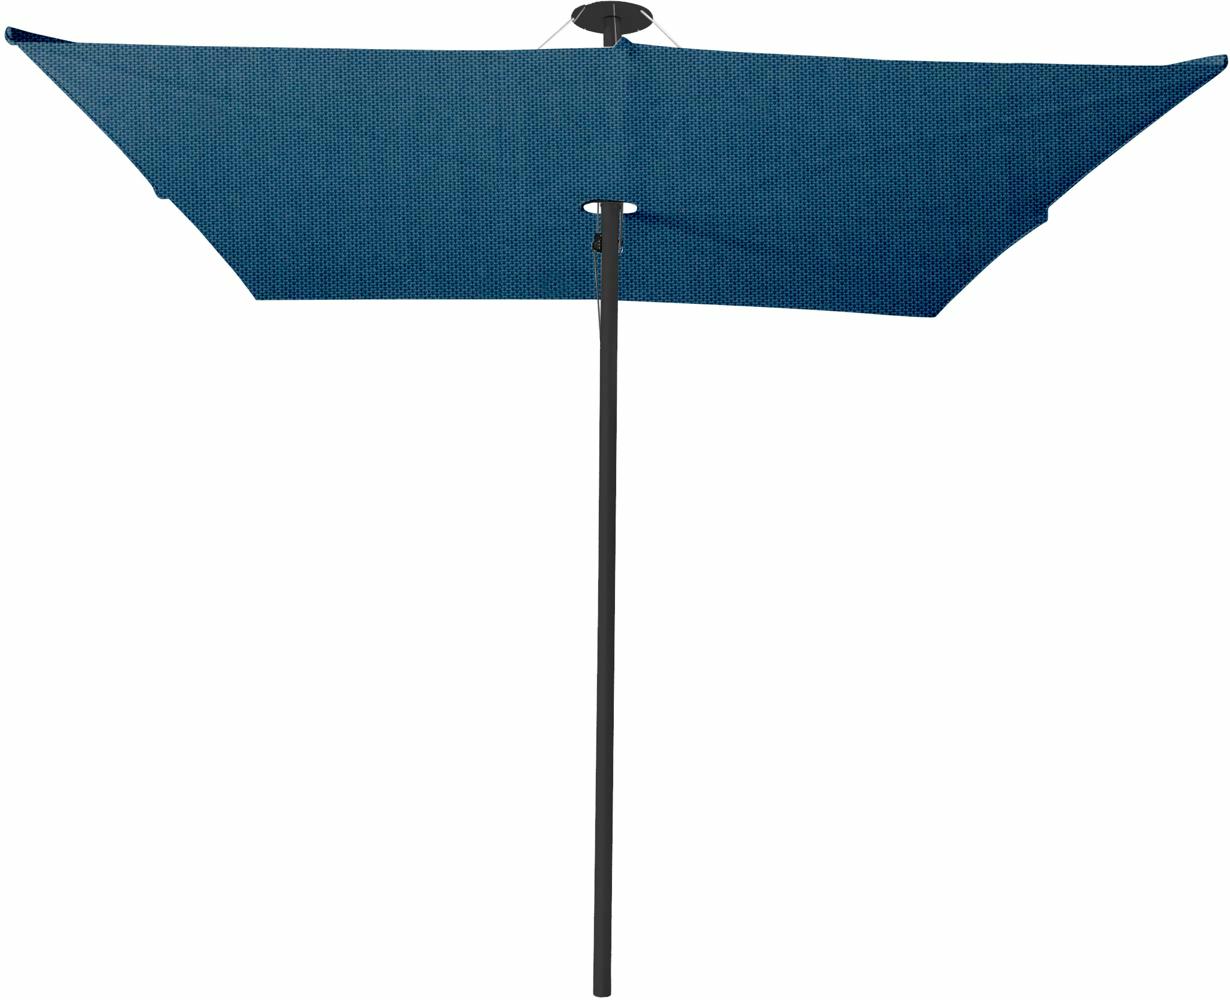 Infina center post umbrella, 3 m square, with frame in Dusk and Solidum BlueStorm canopy.